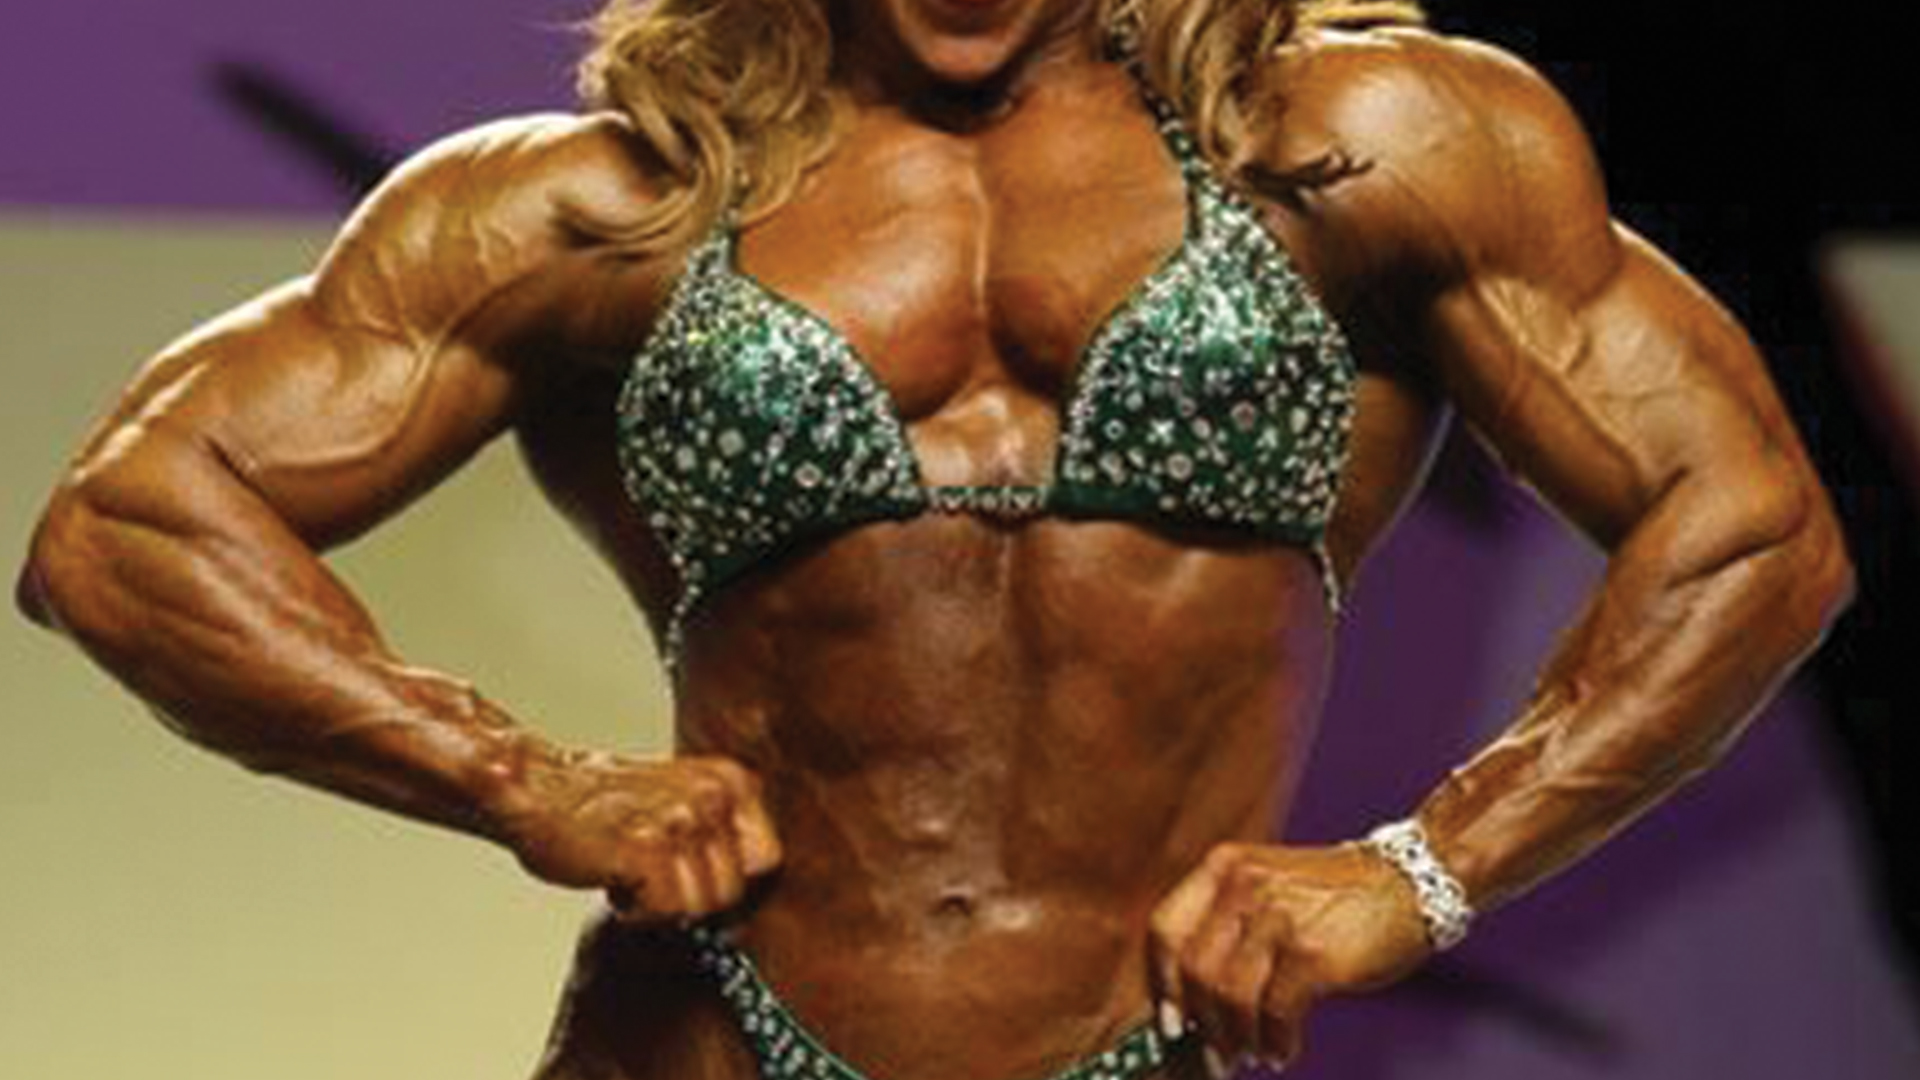 2020 Olympia Womens Bodybuilding Results